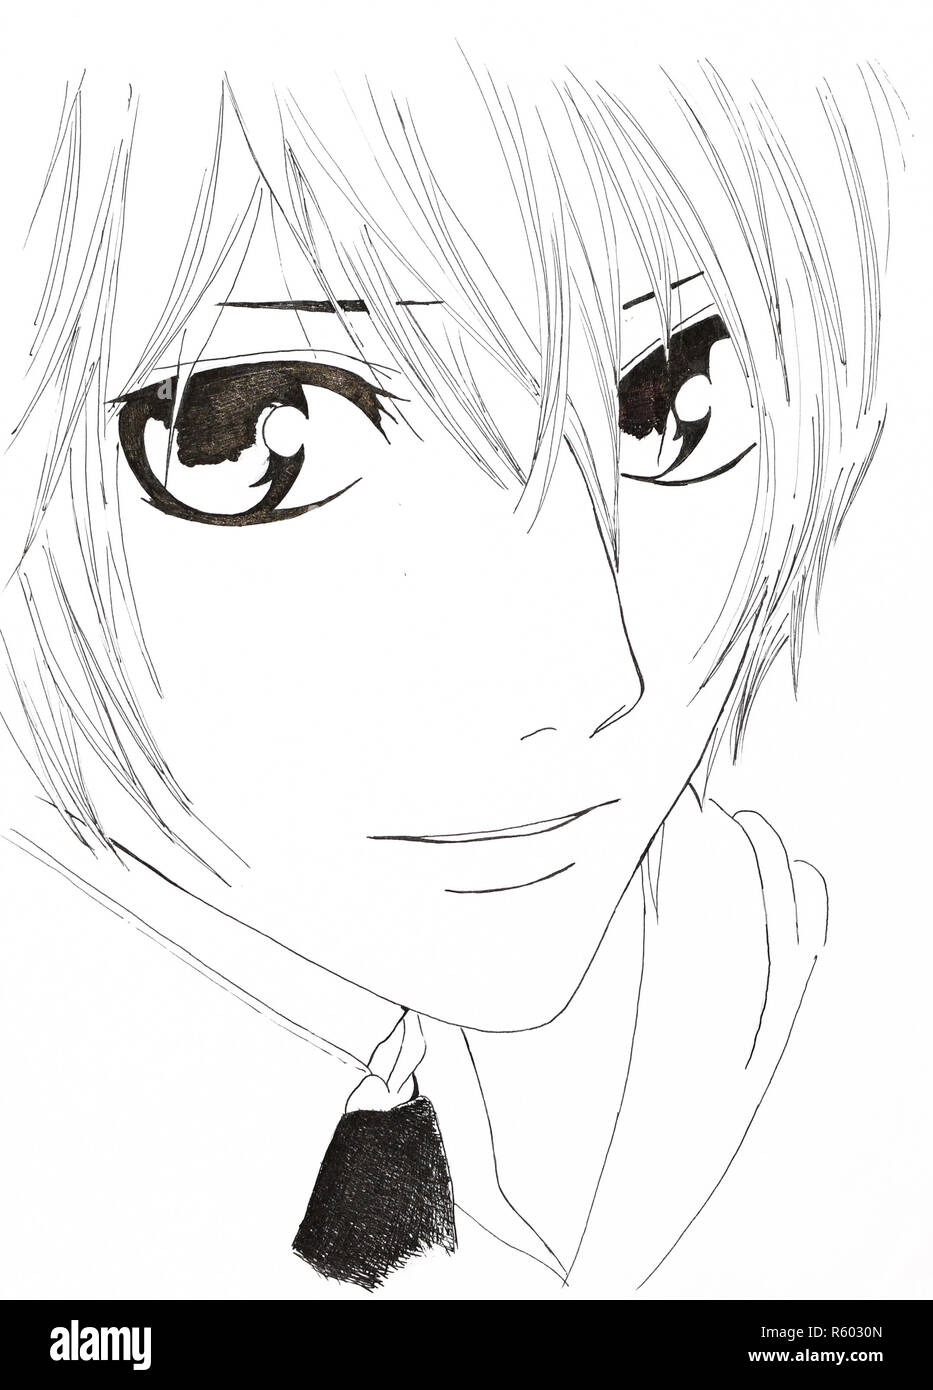 How To Draw A Manga / Anime Styled Portrait: Male Edition